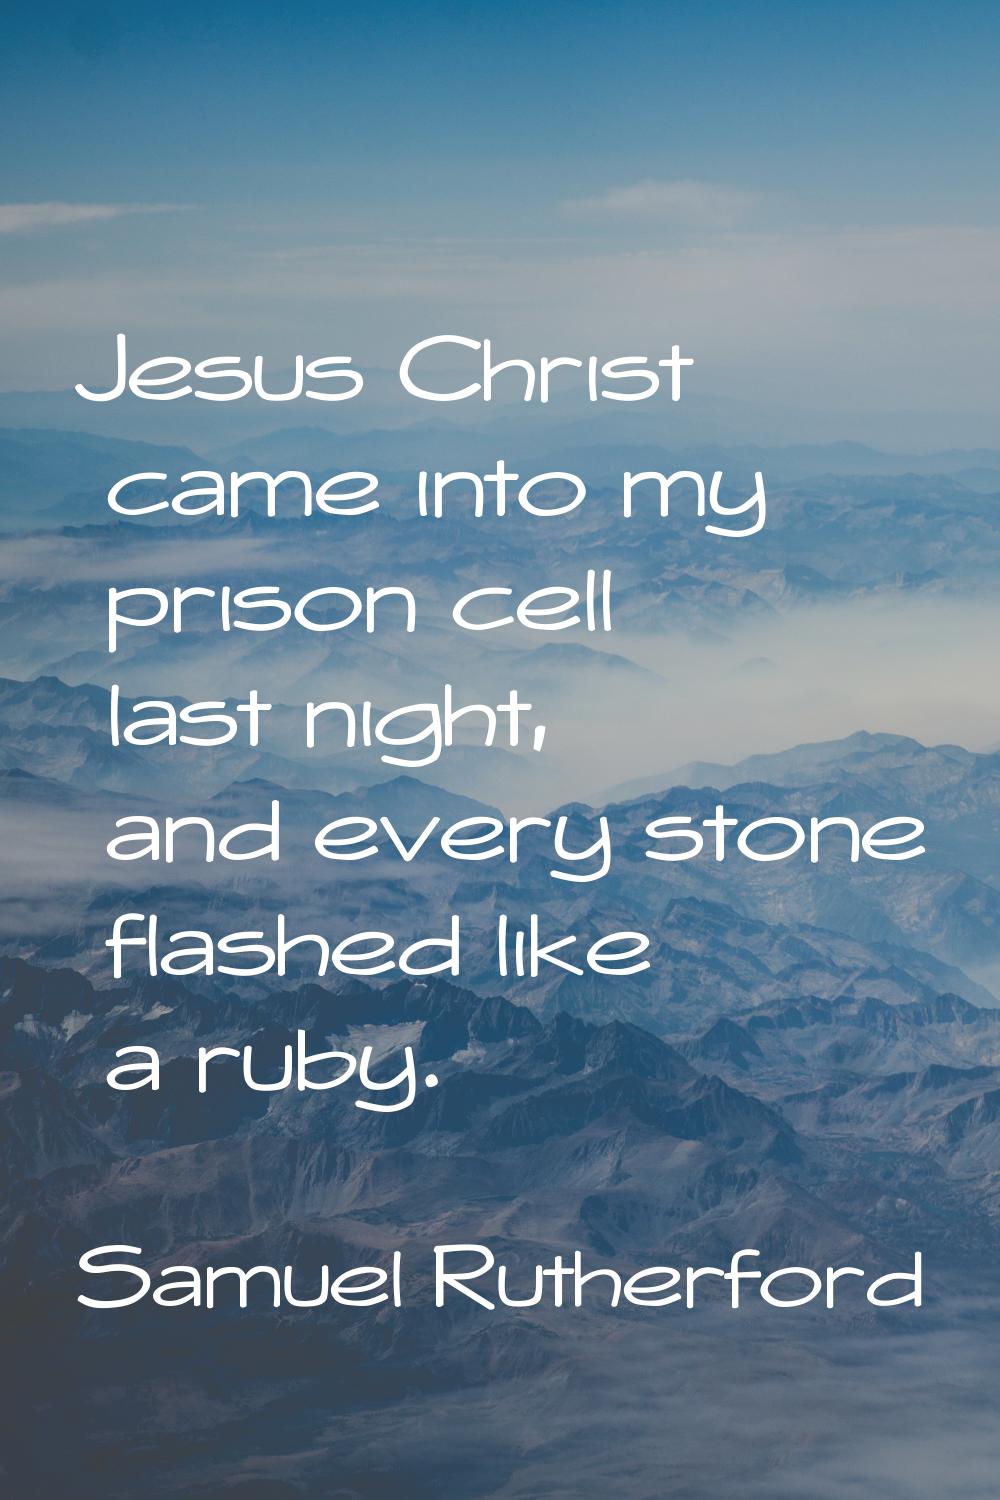 Jesus Christ came into my prison cell last night, and every stone flashed like a ruby.